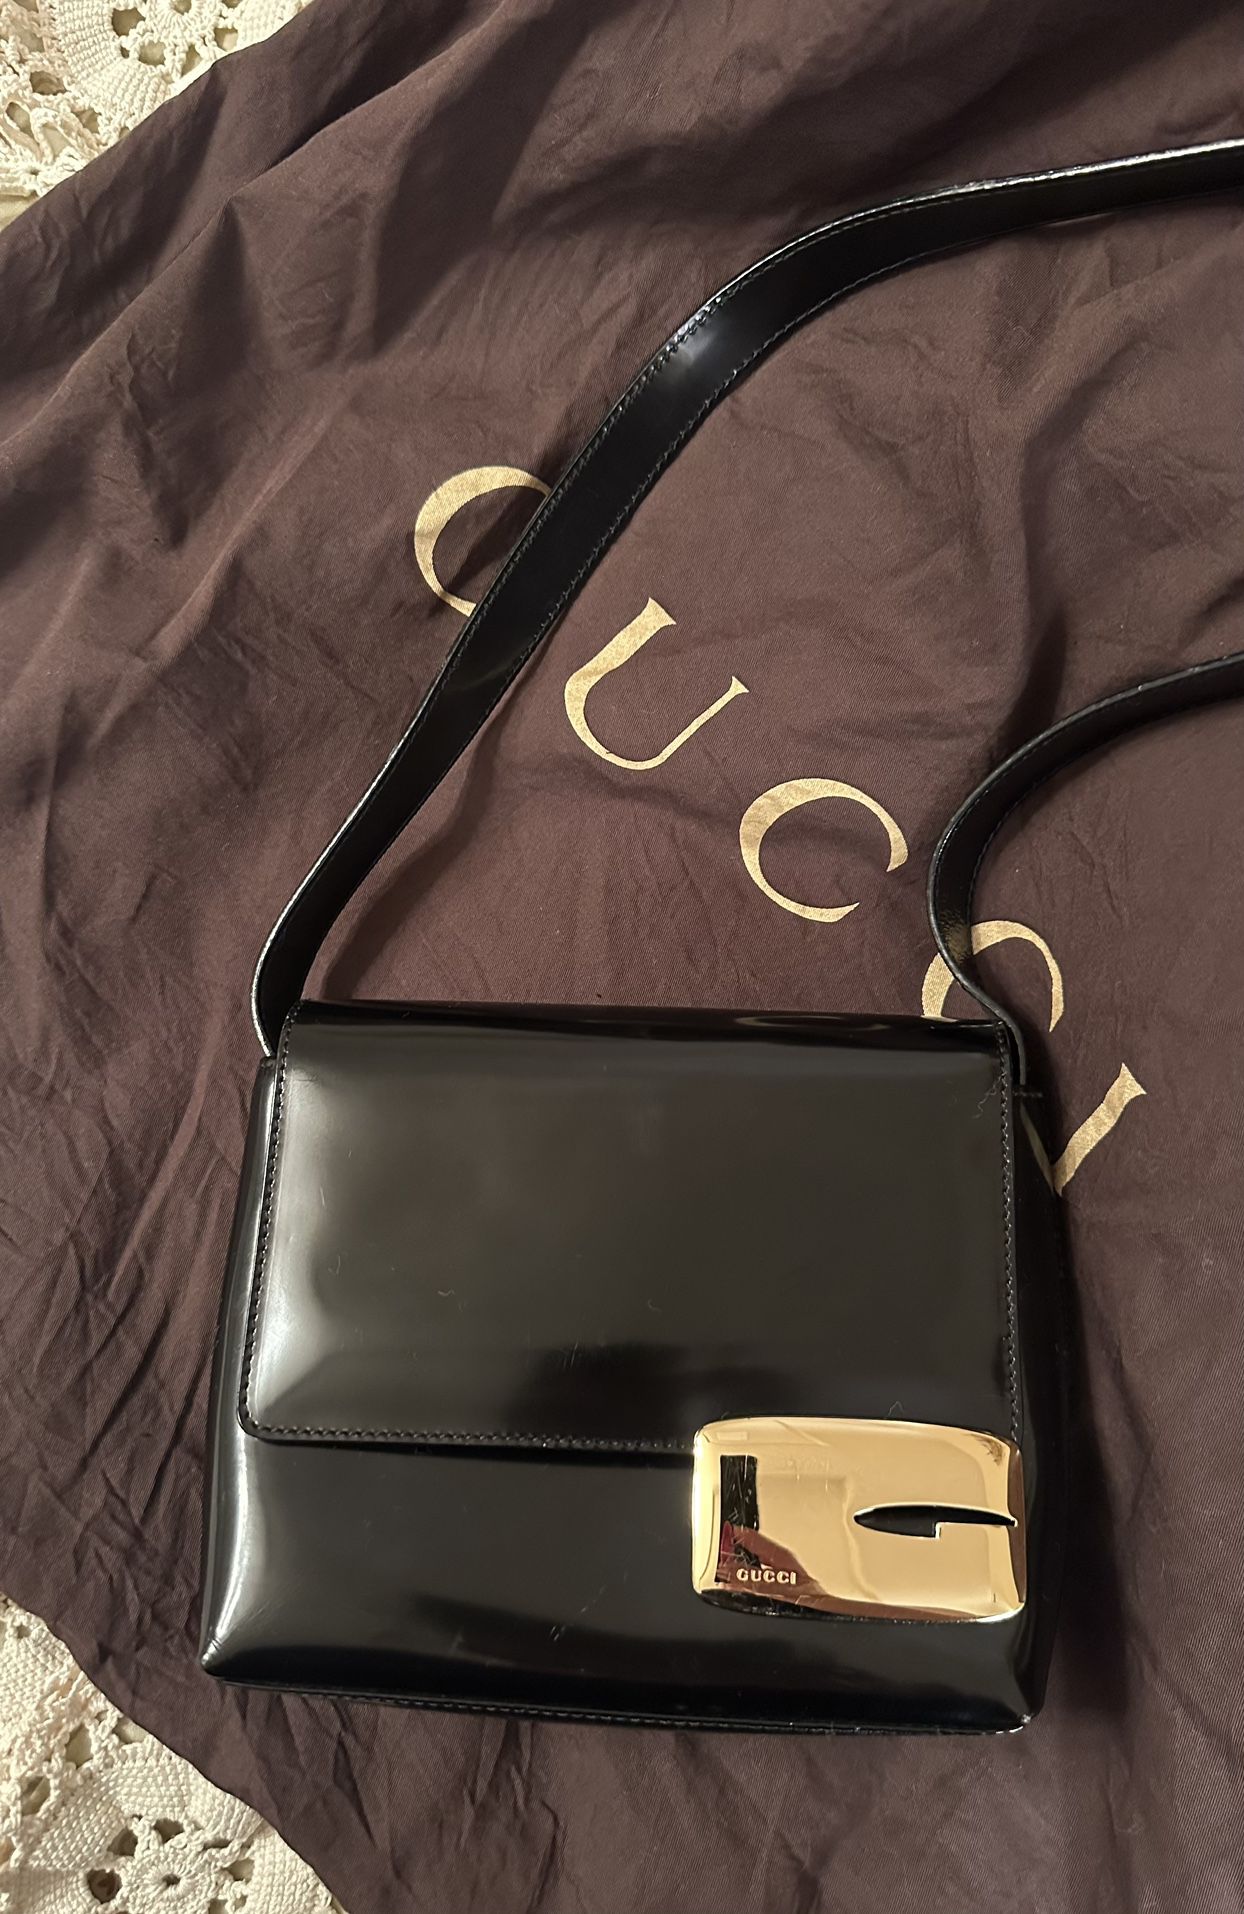 Authentic Gucci Purse With Serial Number 